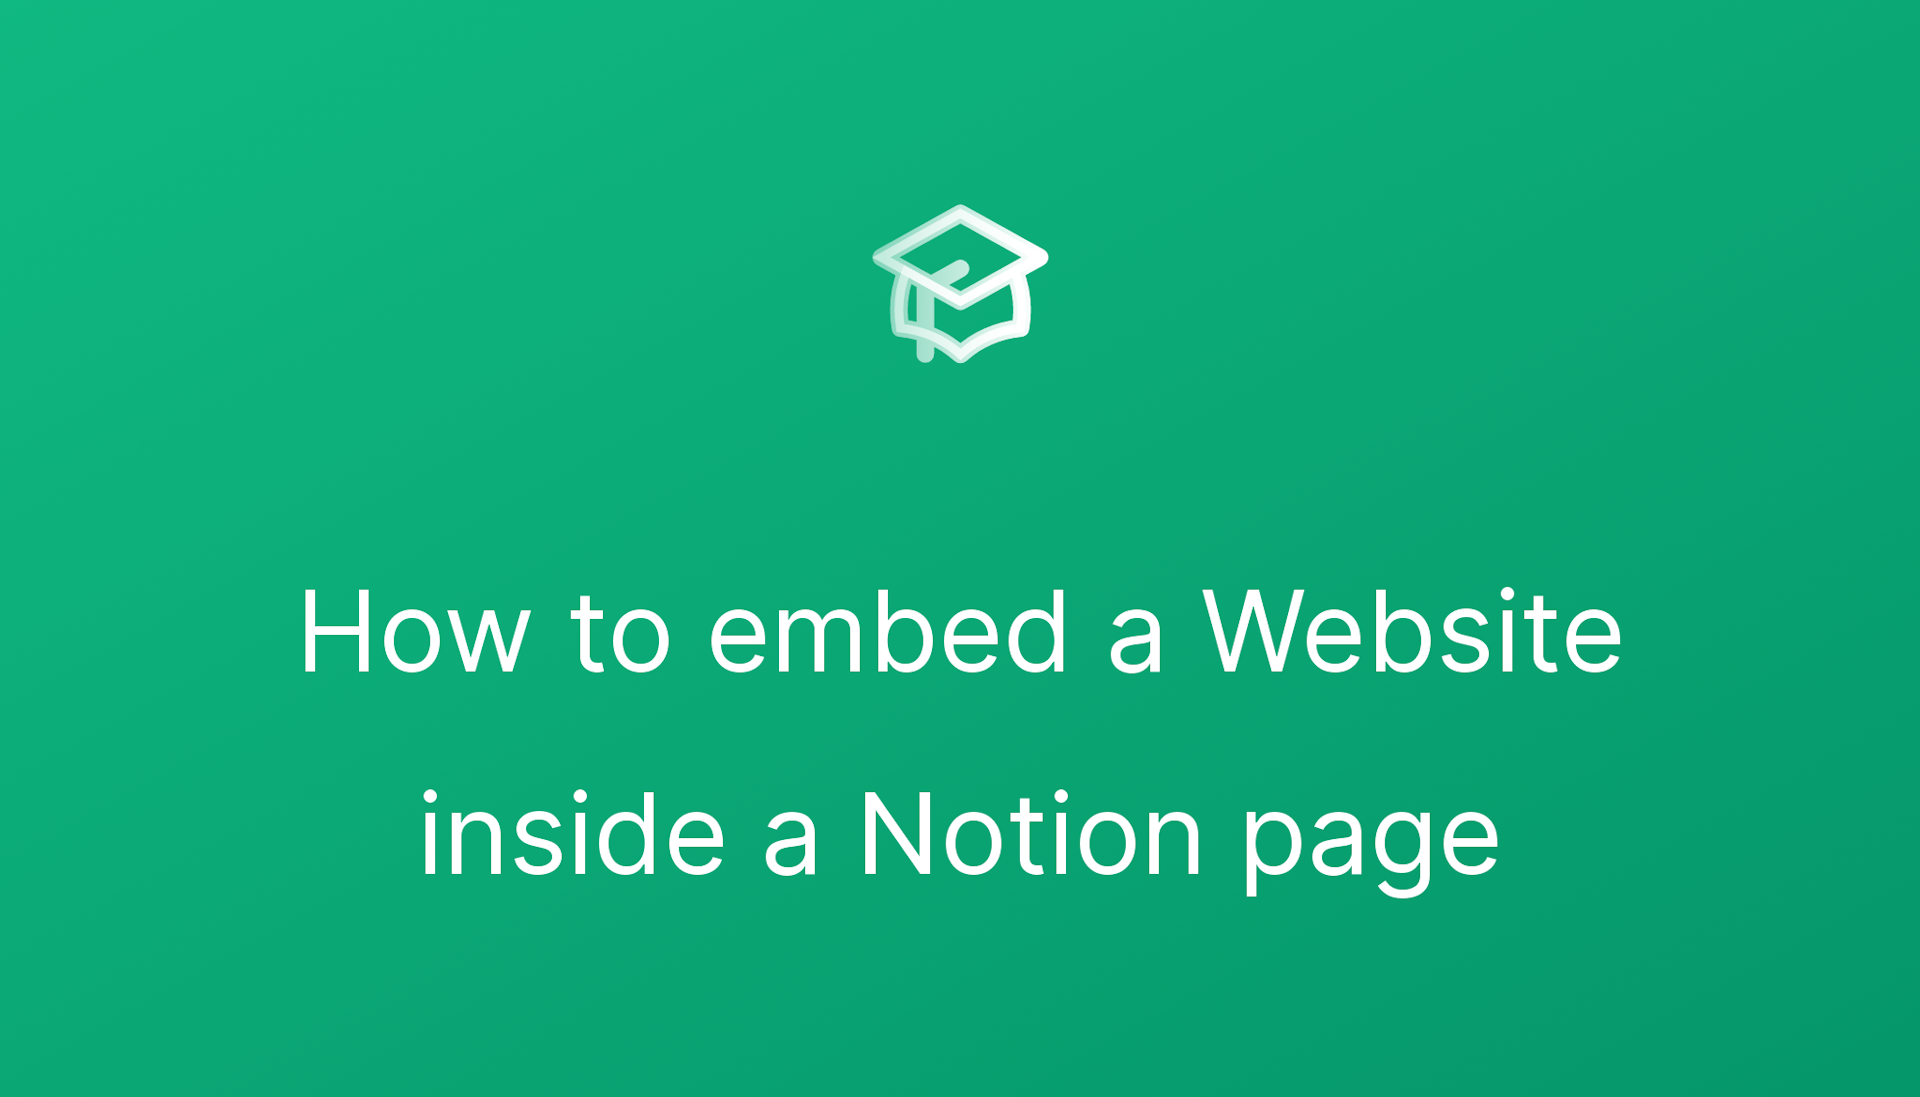 How to embed a Website inside a Notion page